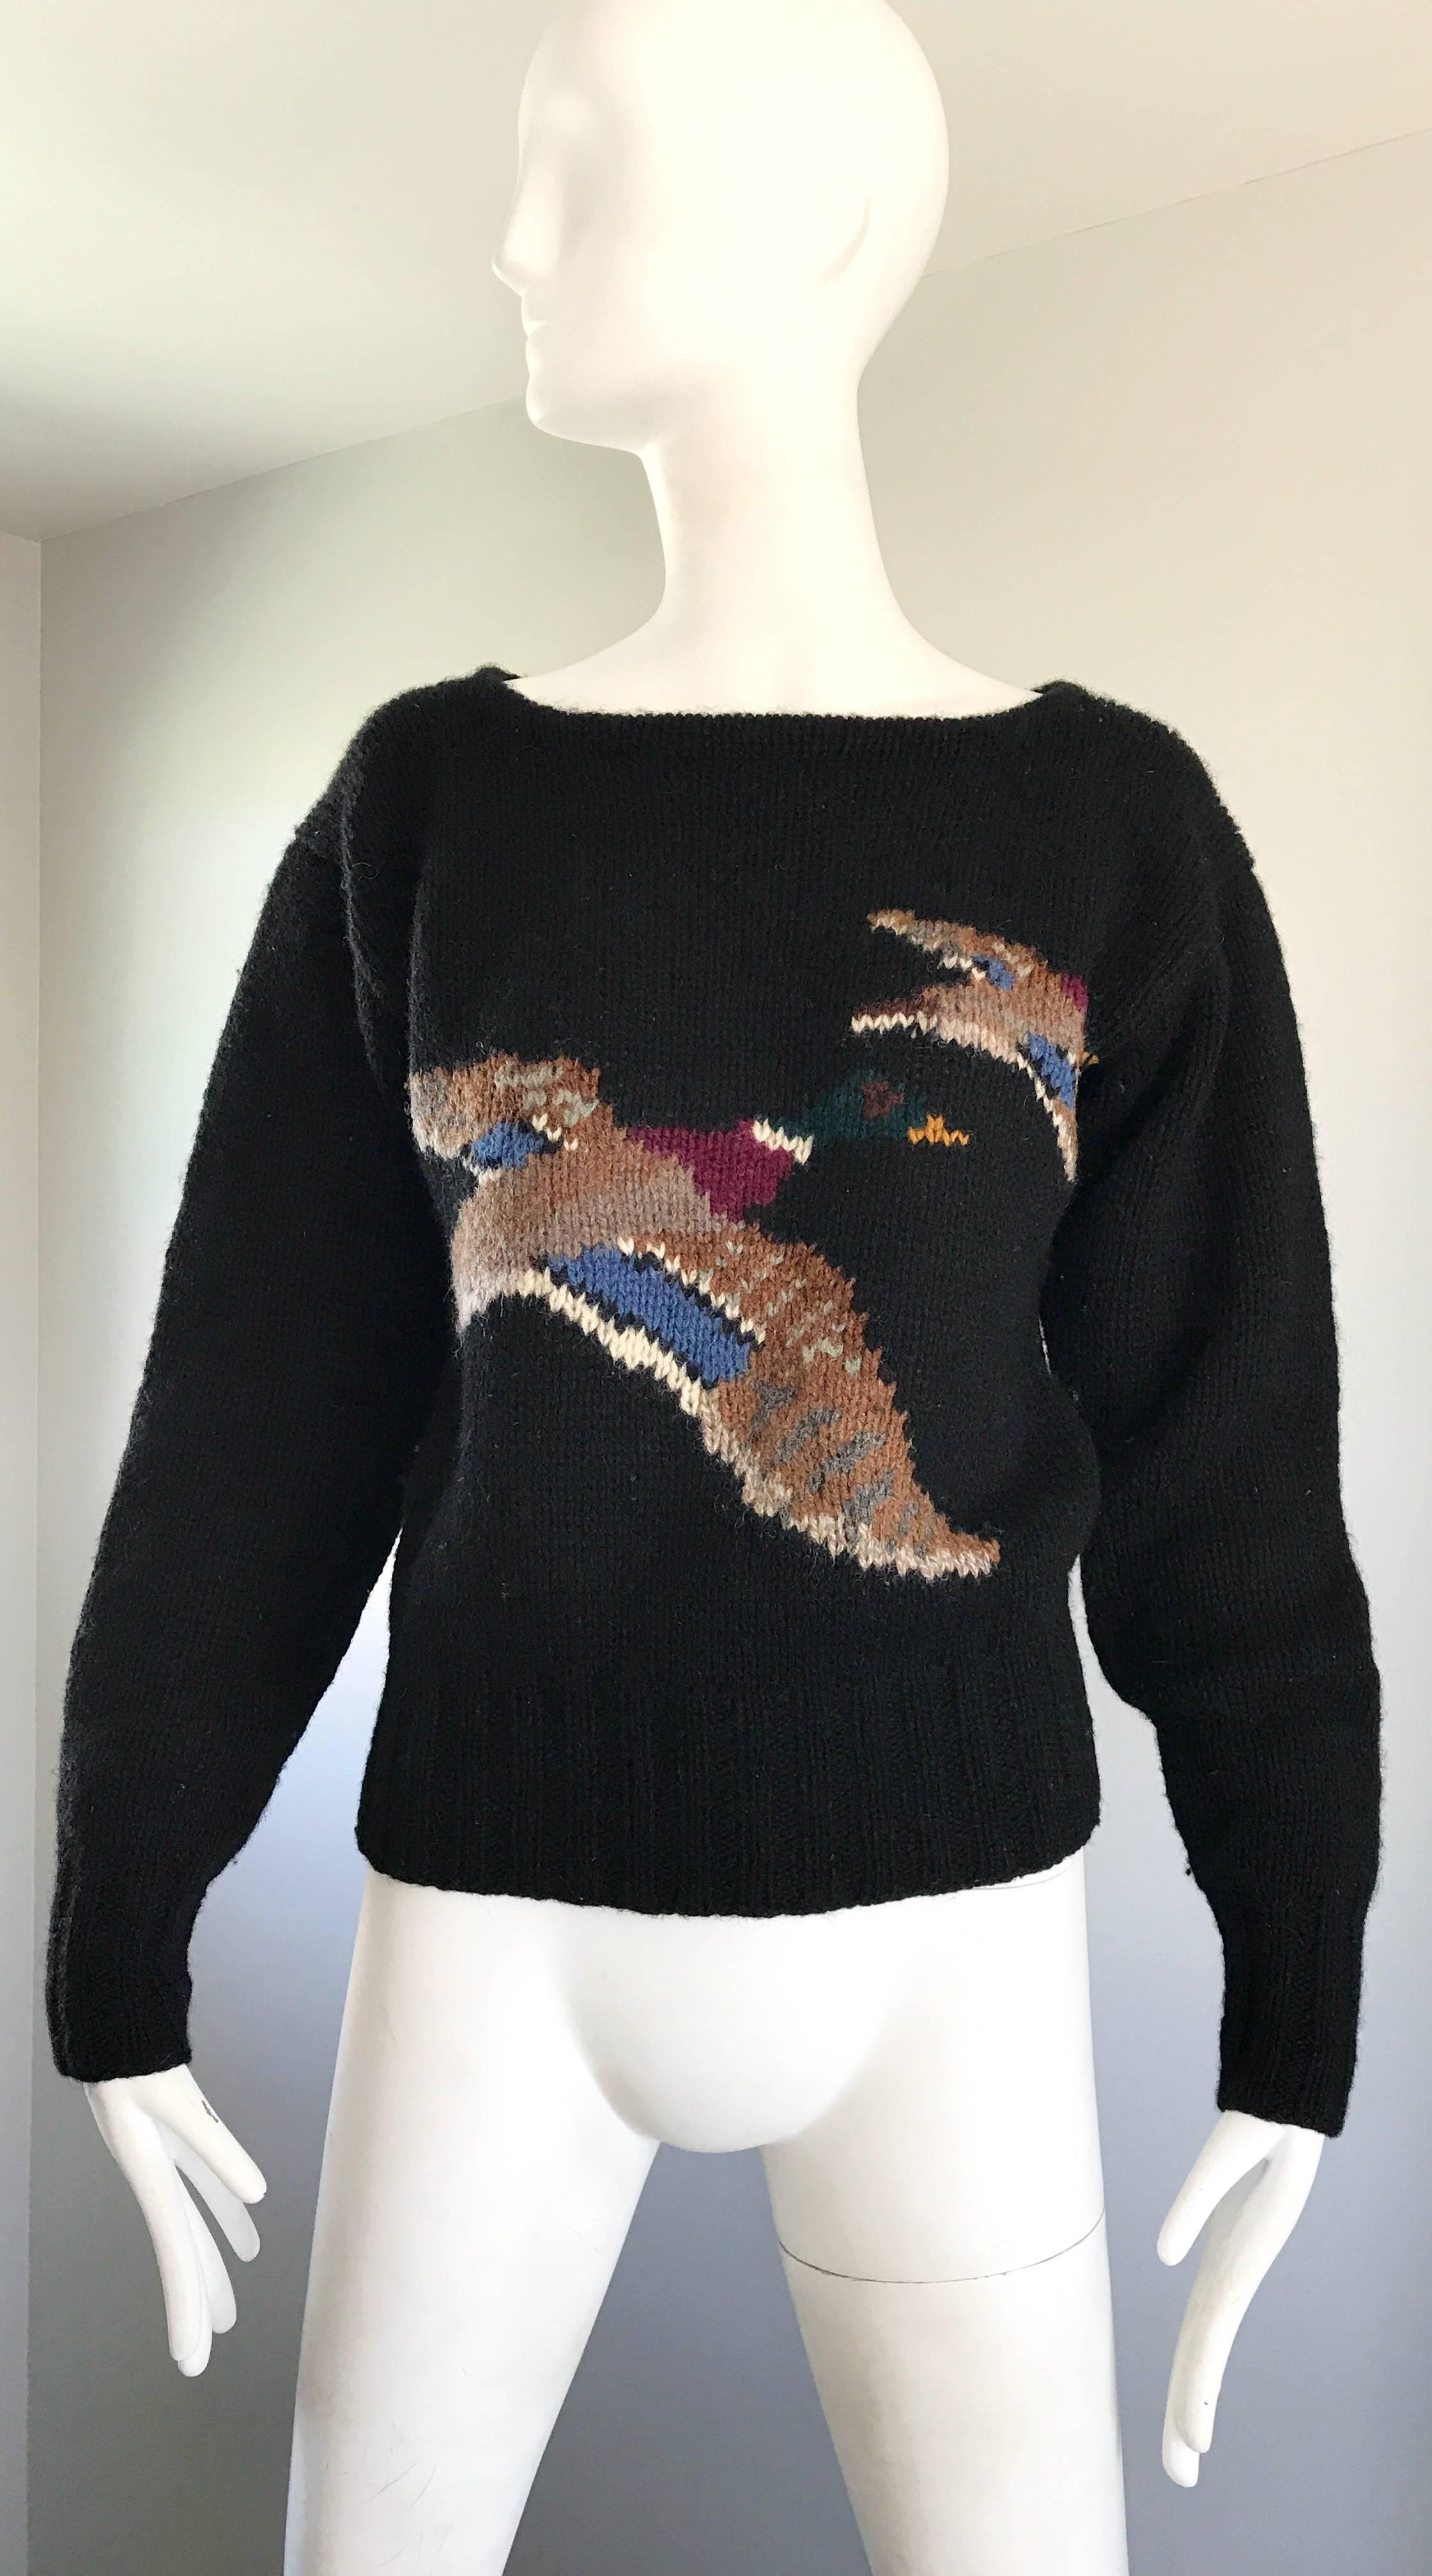 Rare vintage RALPH LAUREN Blue Label Intarsia hand knitted novelty duck print black wool sweater! Features two ducks flying across the front. Warm hues of maroon burgundy, green, blue, tan, brown and white. Soft virgin wool is so soft, and keeps you